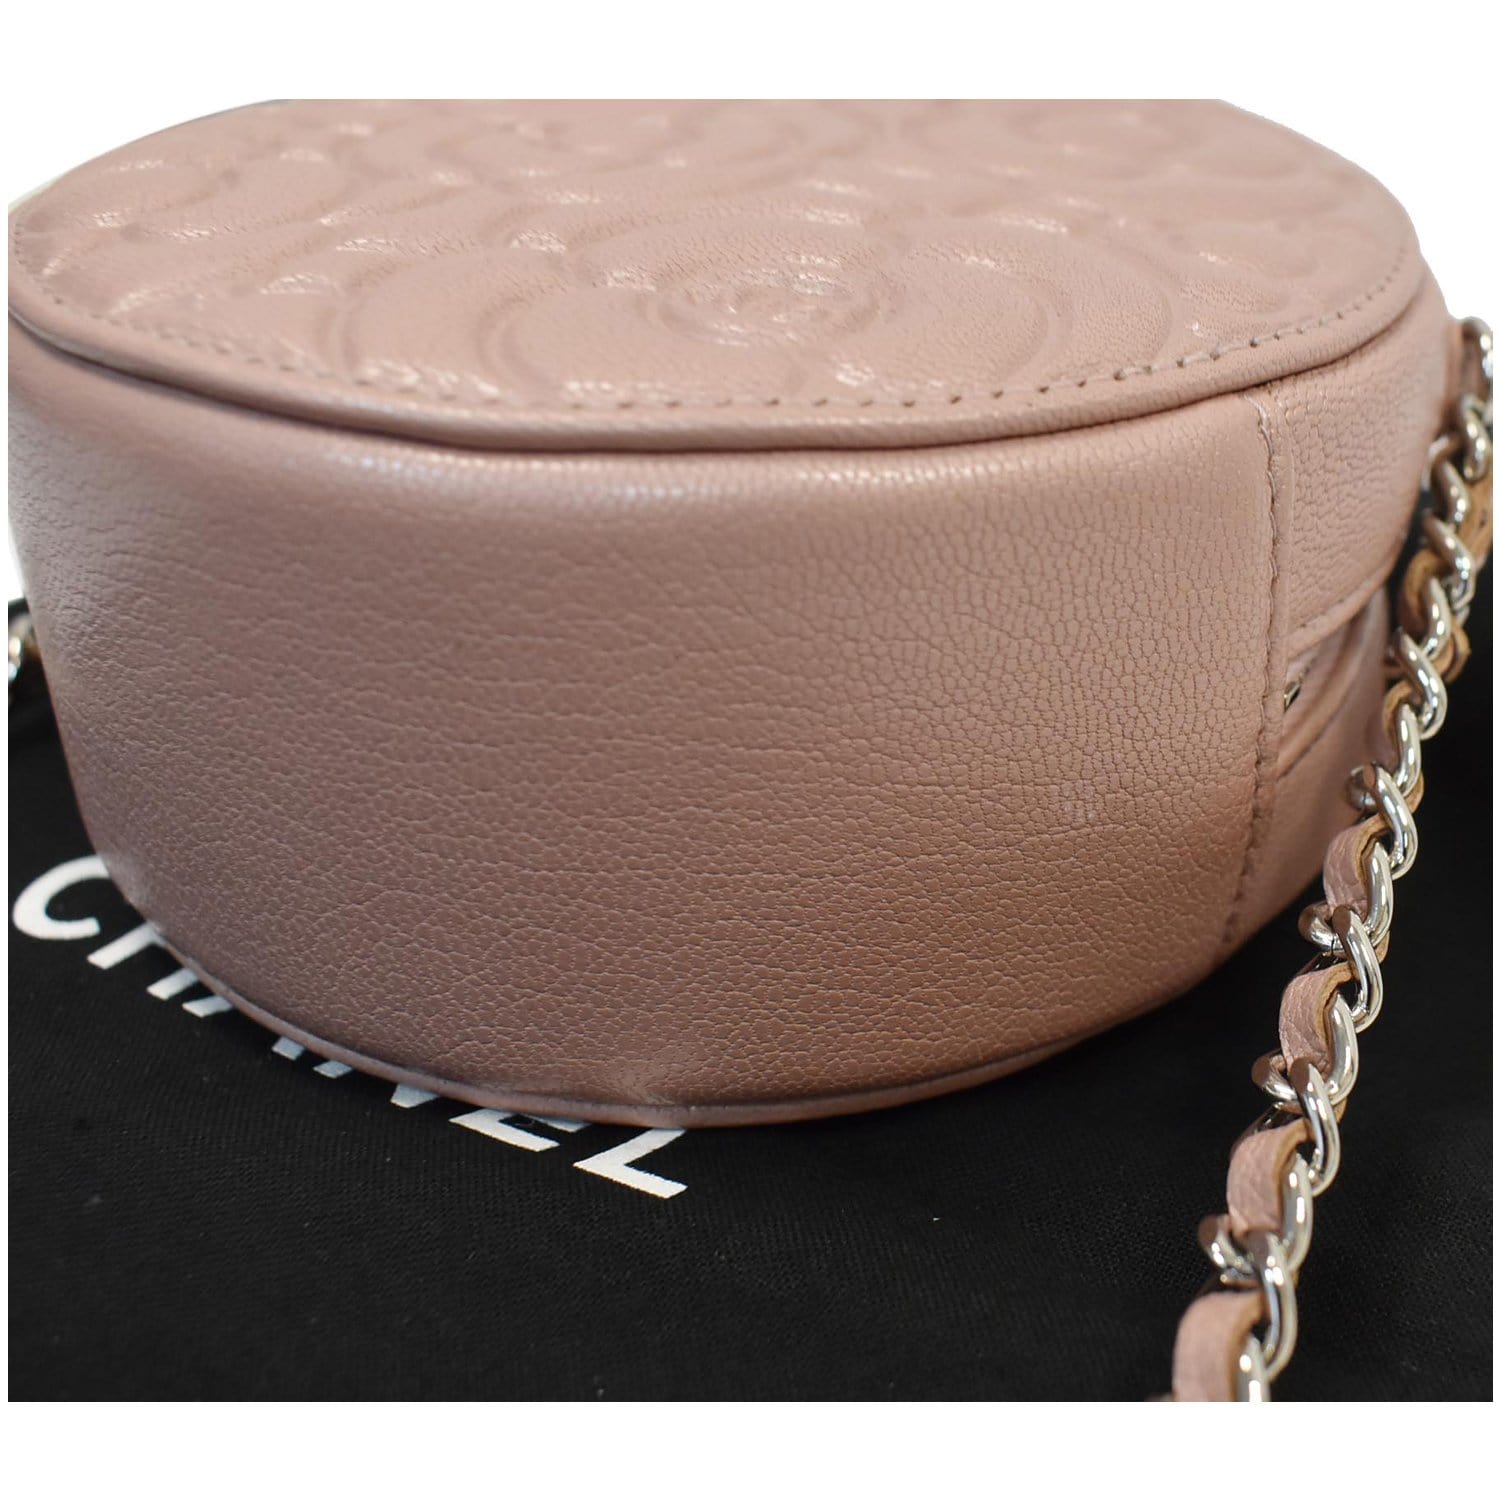 Lot - New CHANEL Camellia Limited Edition Crossbody Bag